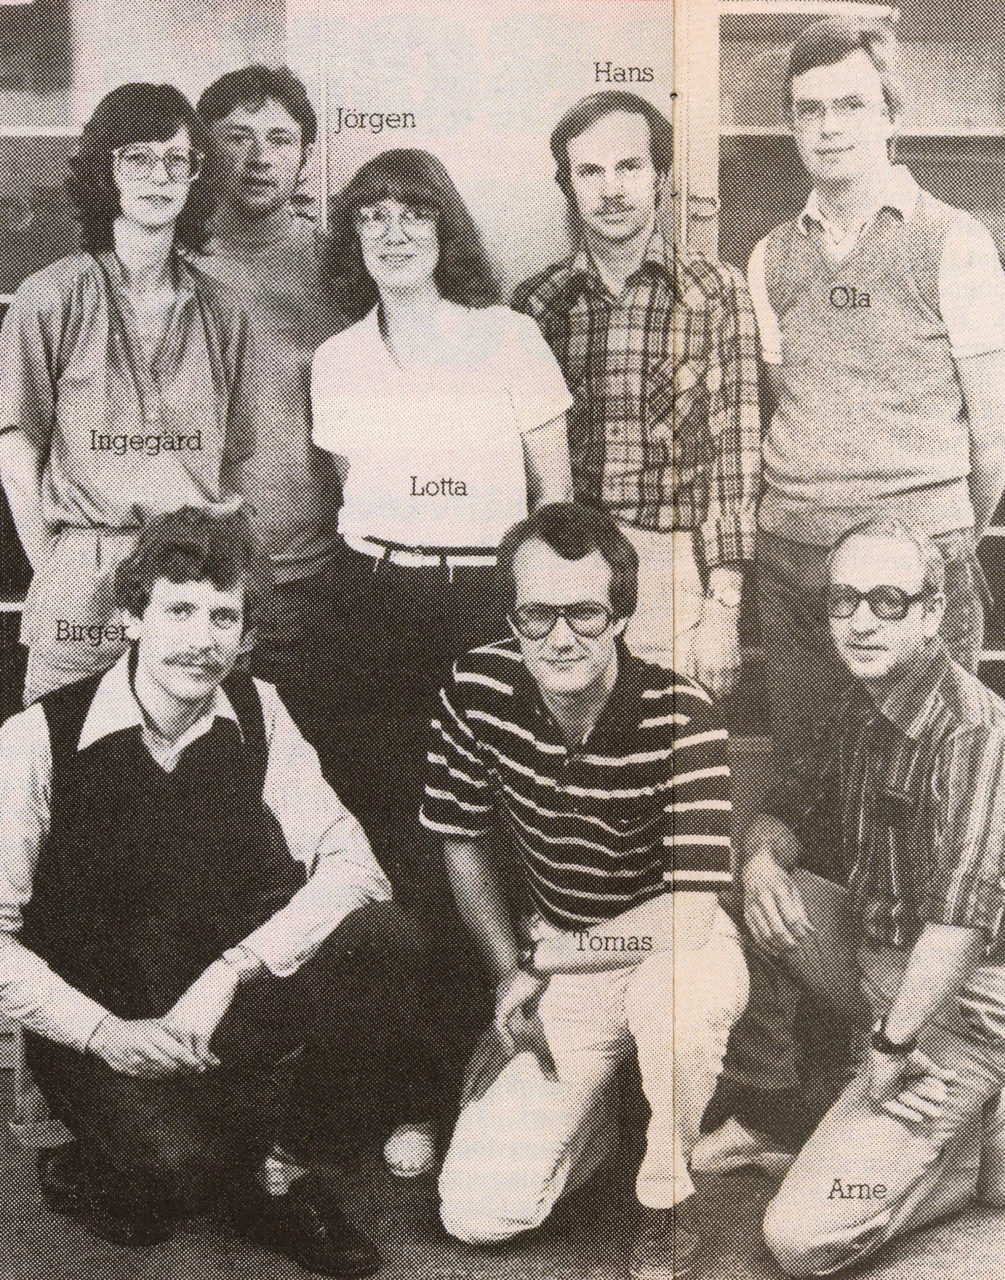 Newspaper photo of small group of staff at IKEA Sweden dressed in 1980s casual clothing.